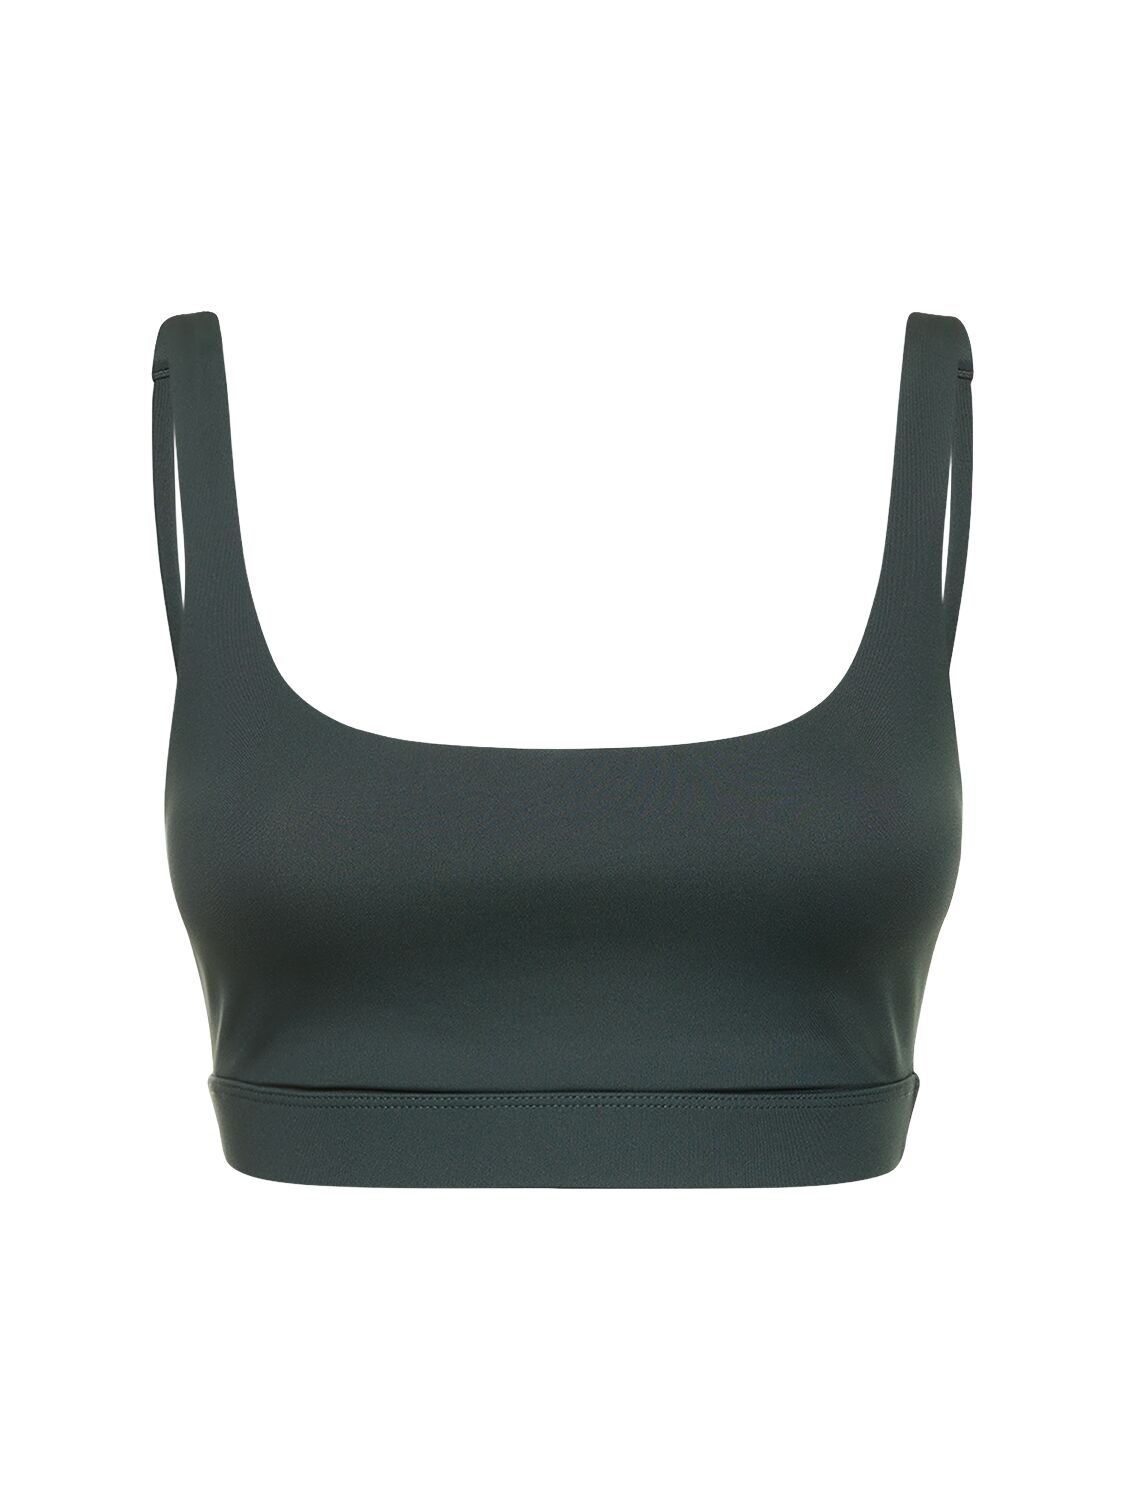 Girlfriend Collective Andy Stretch Tech Bra Top In Green